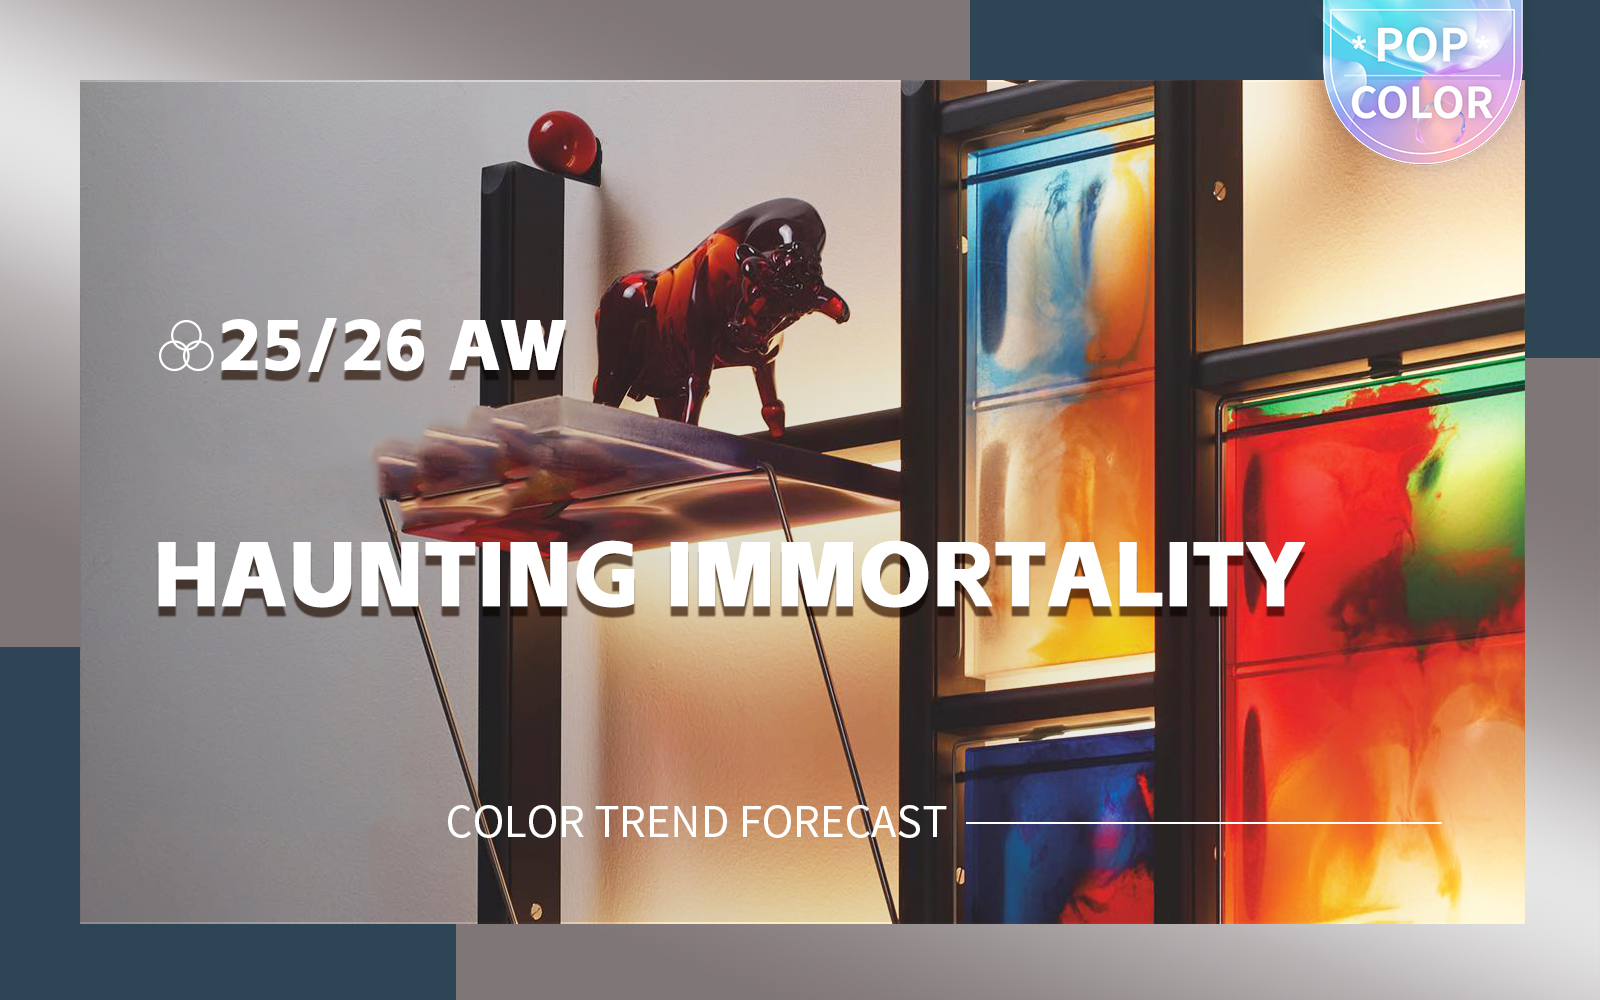 Haunting Immortality -- A/W 25/26 Color Trend Forecast